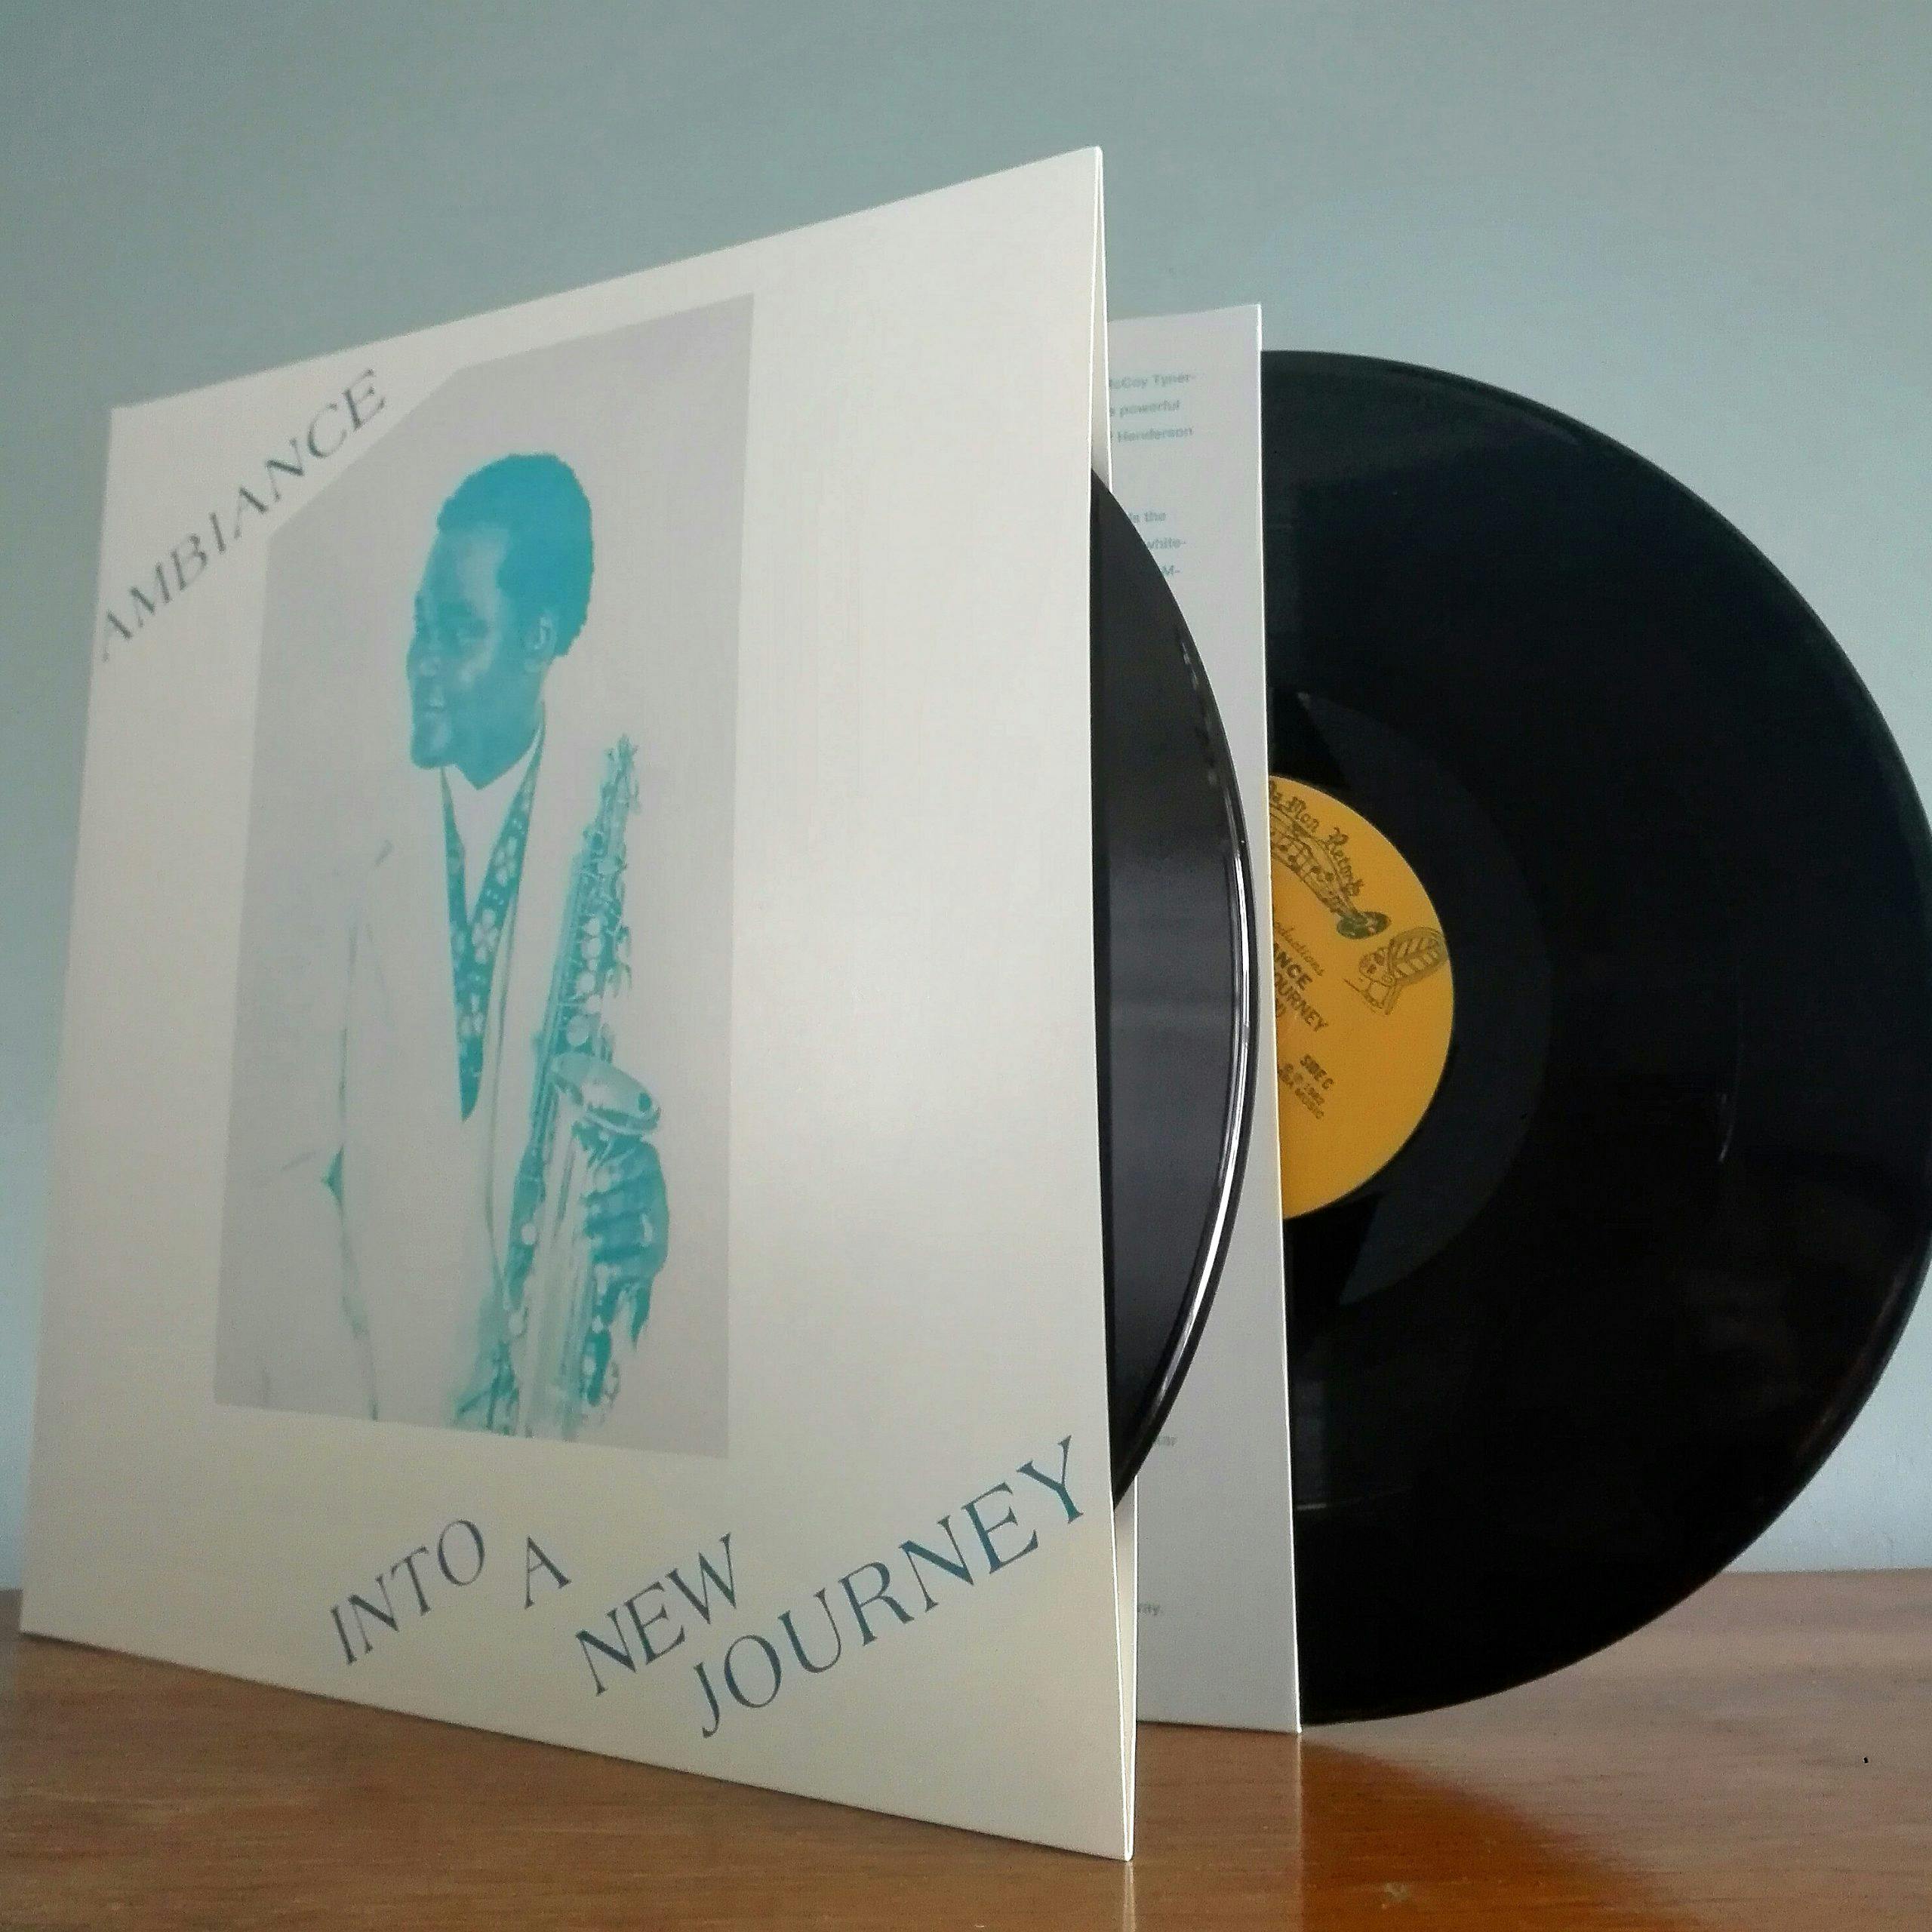 COMPETITION: Win Copies of Ambiance's 'Into a New Journey' on Vinyl Courtesy of WhoSampled